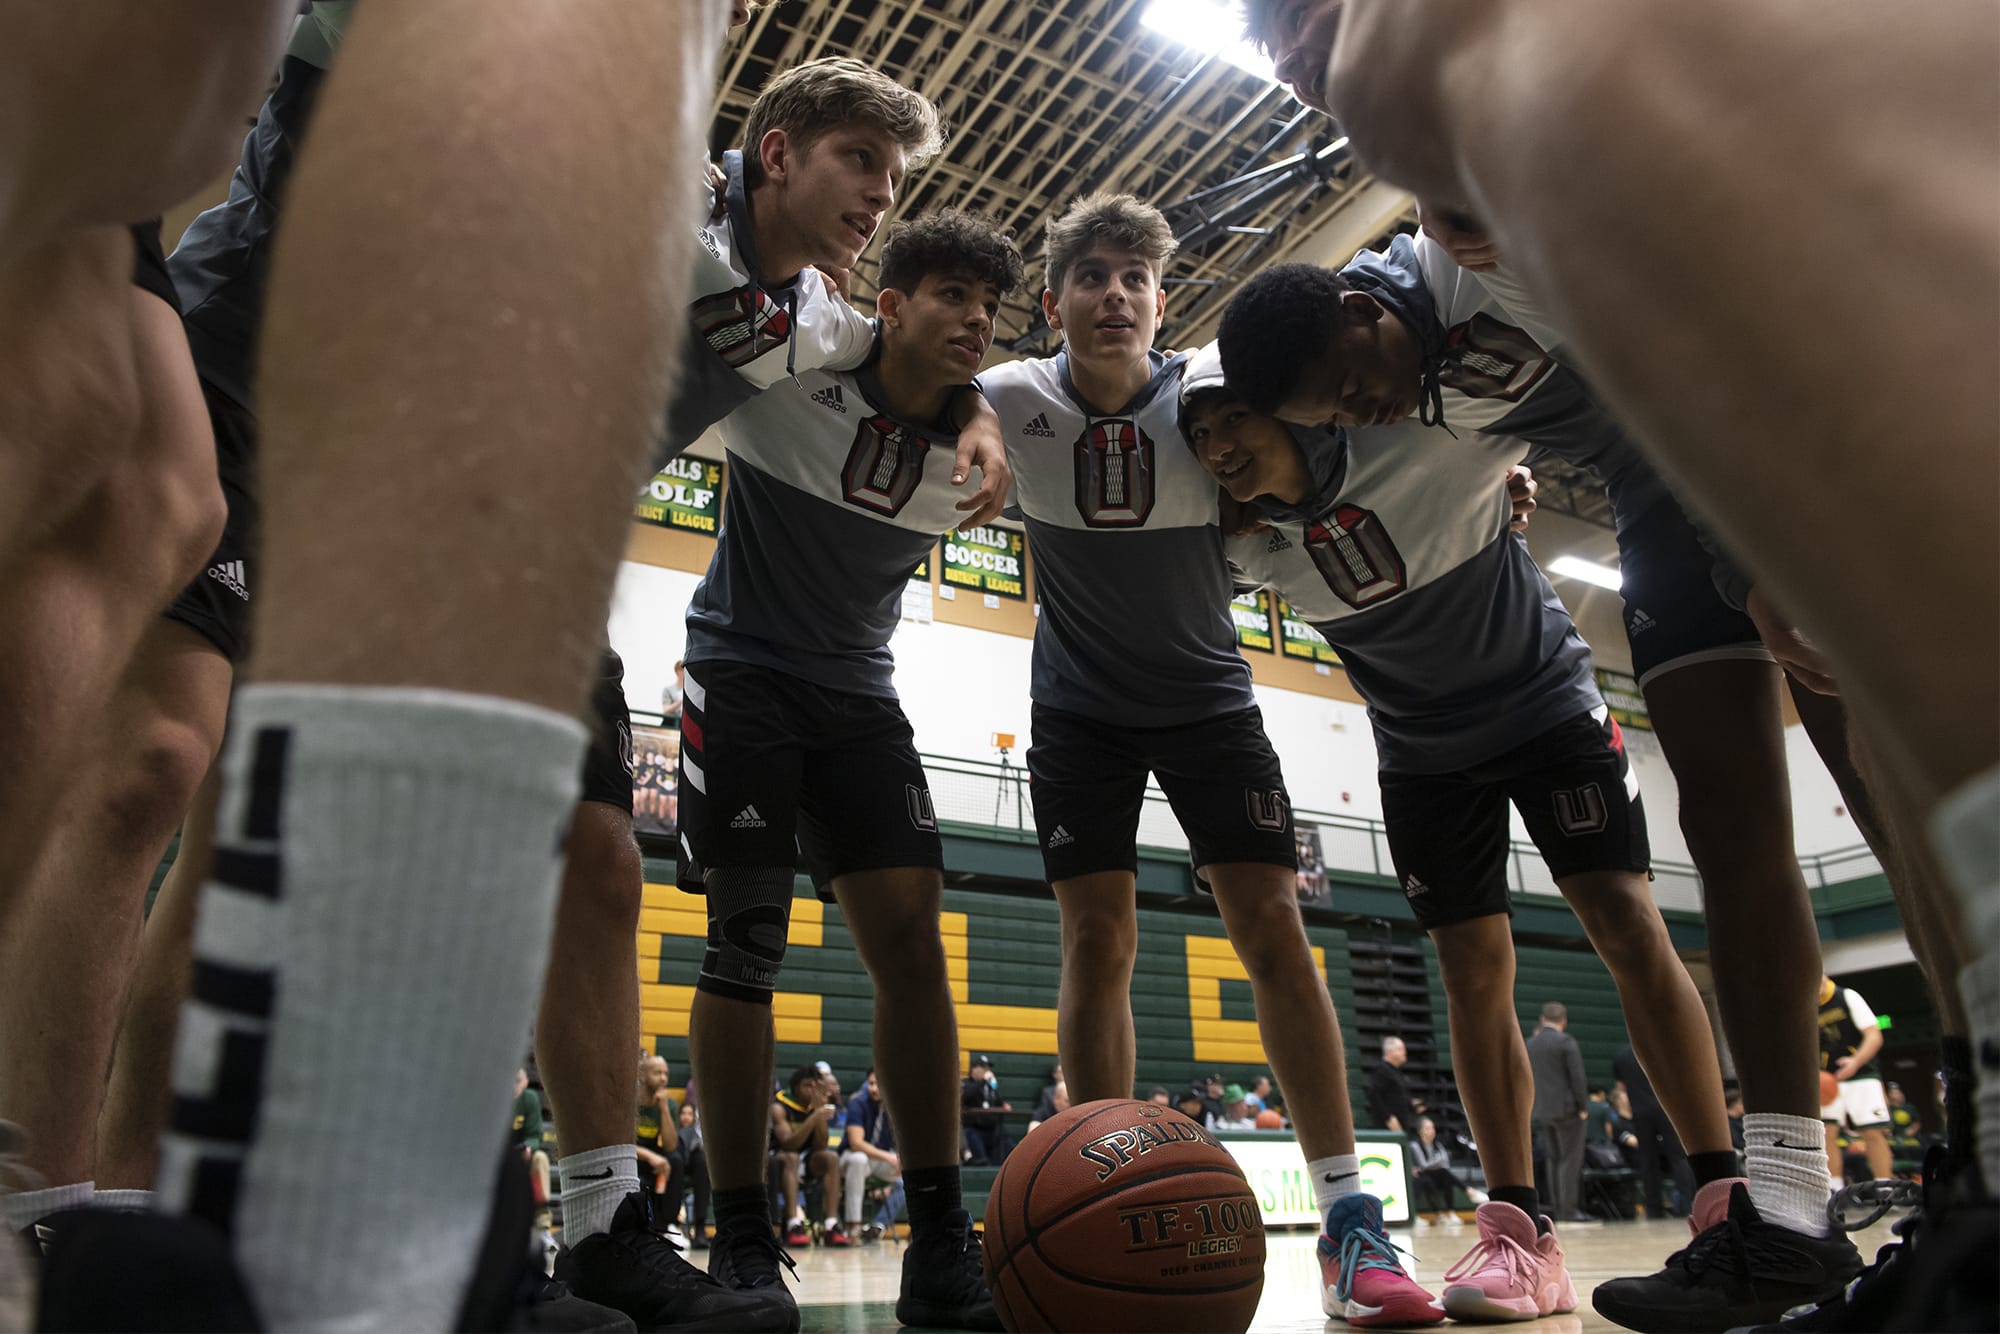 Union huddles prior to their game against Evergreen at Evergreen High School on Wednesday night, Dec. 17, 2019.